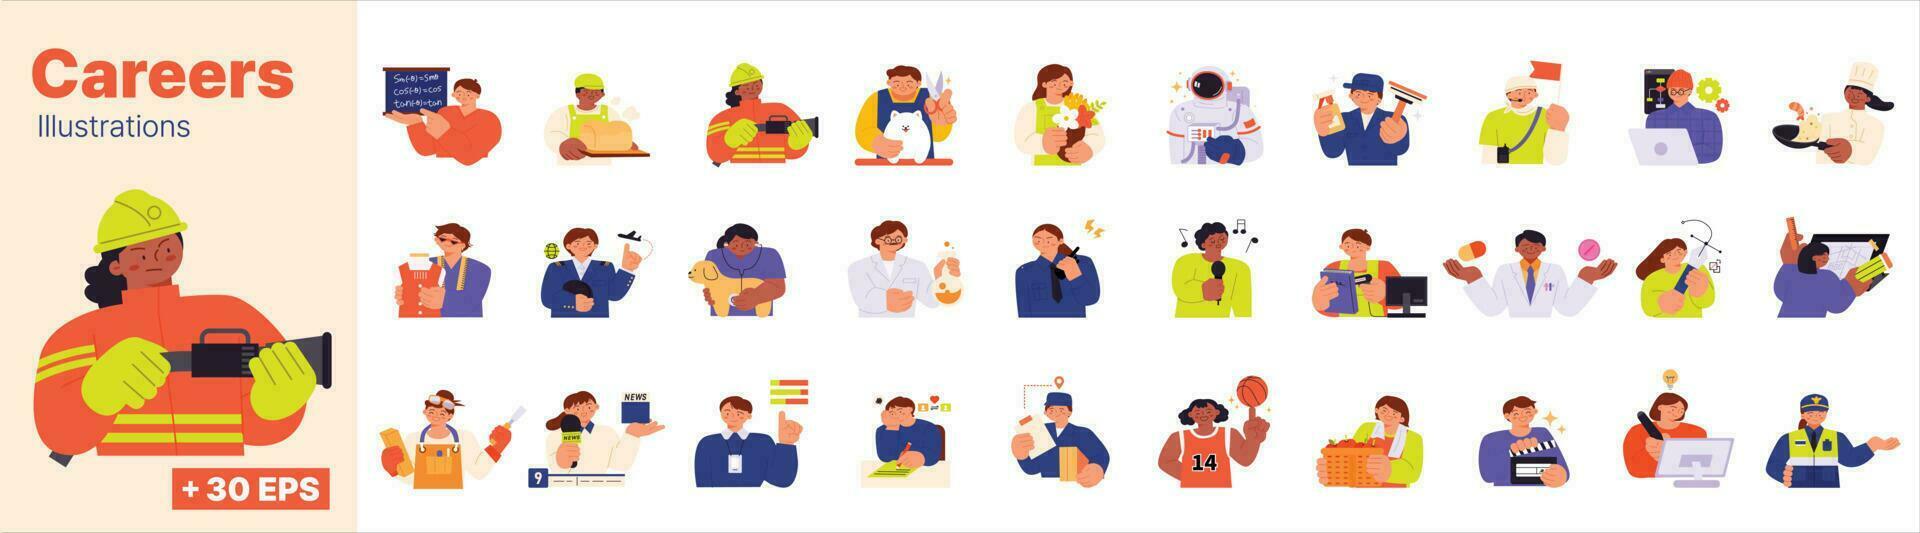 Labor Day. people who are working. Characters and uniforms of various occupational groups such as production workers, field workers, and office workers. vector